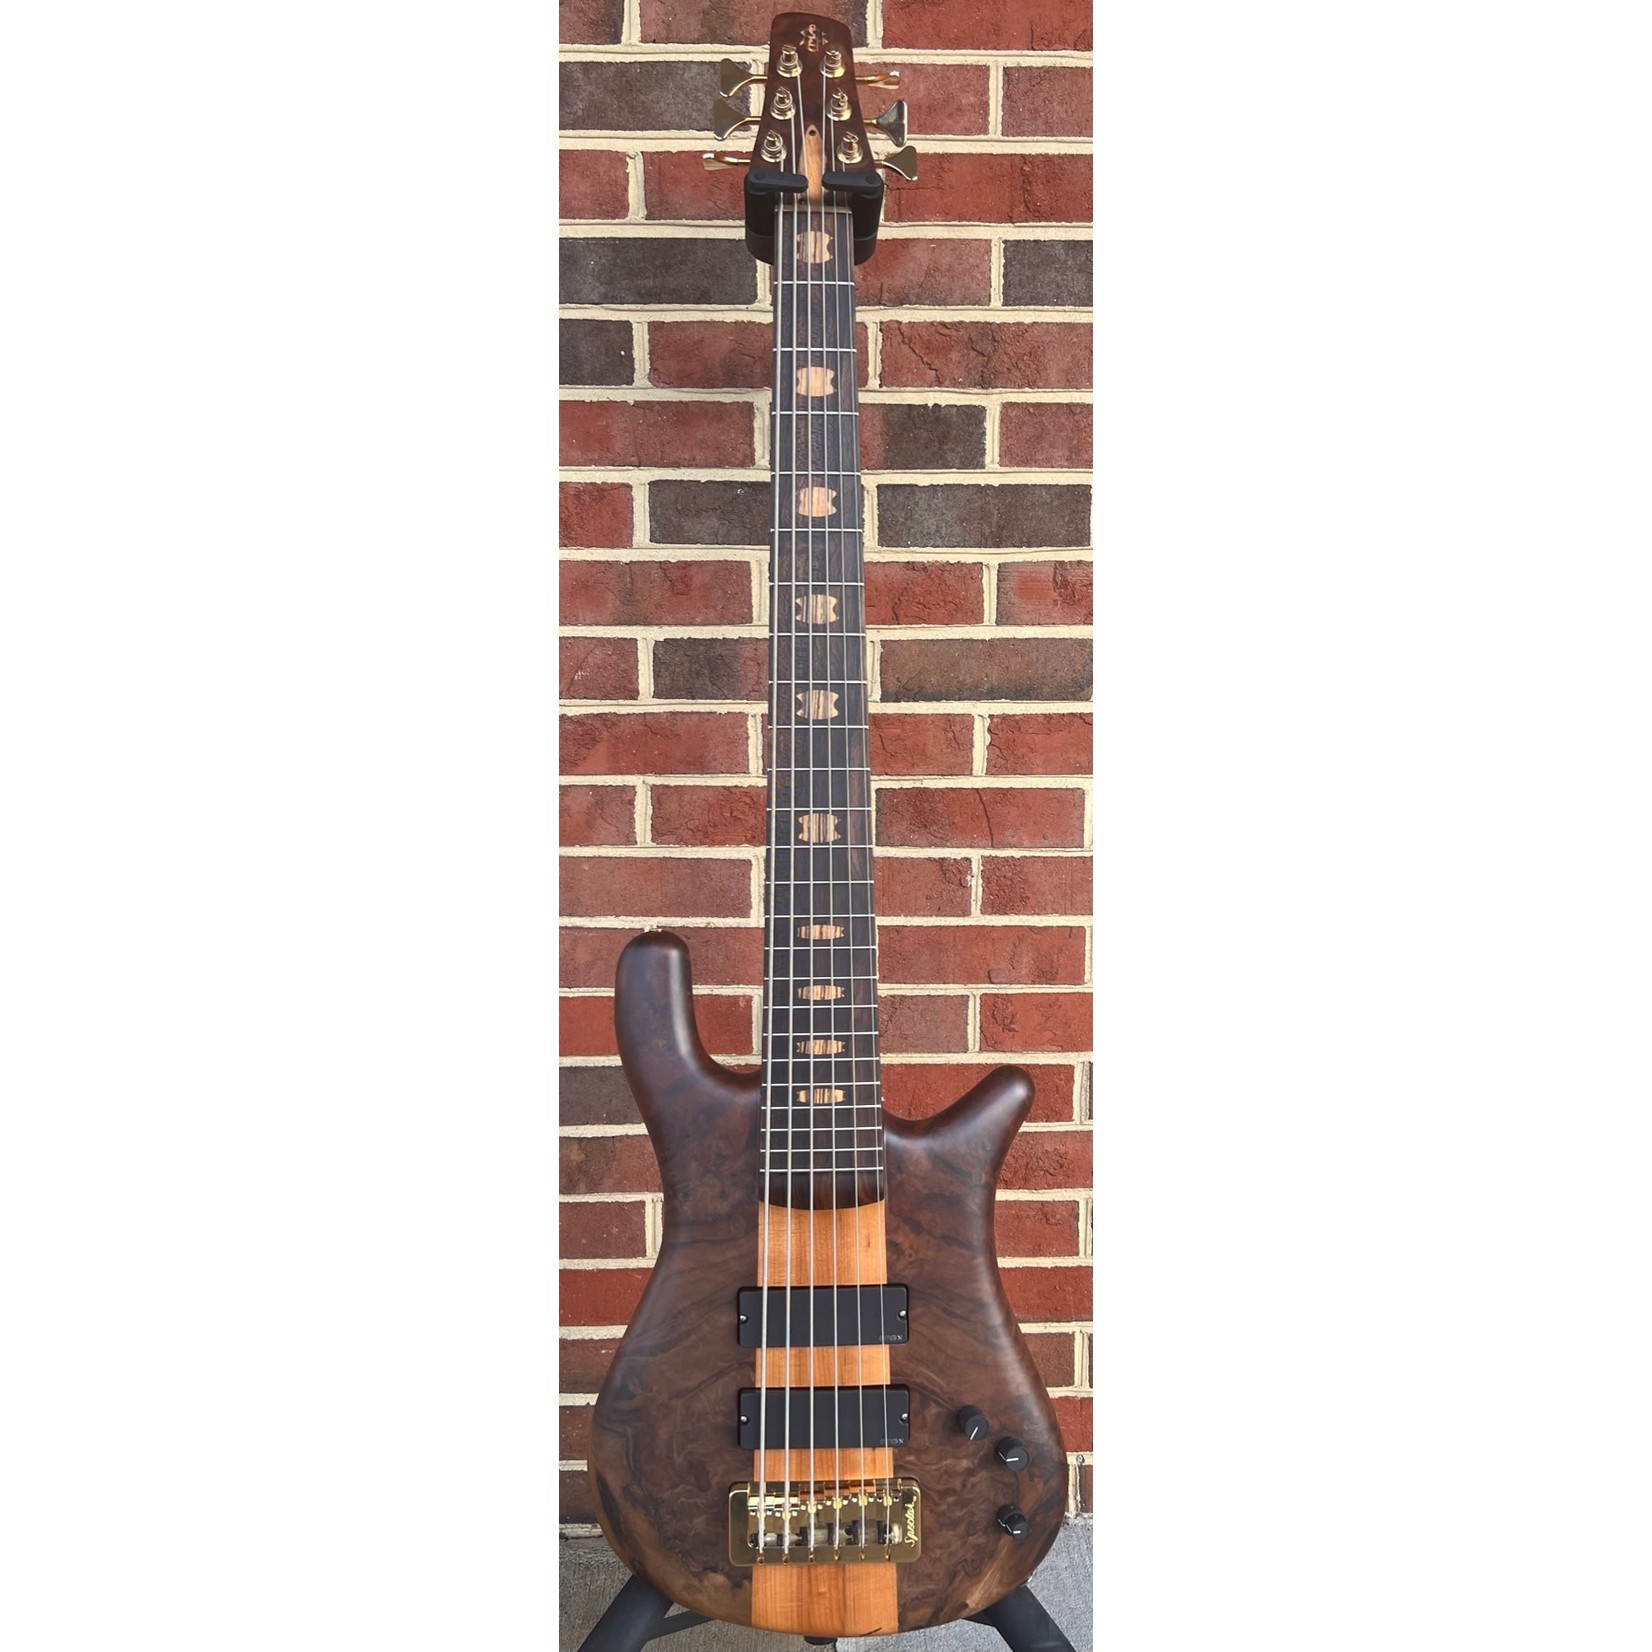 Spector Spector USA NS-6, Walnut Burl Top, Swamp Ash Body - Weight Relieved, Roasted Maple Neck, Ziricote Fretboard, Pale Moon Ebony Inlays, EMG 45DCX Pickups, HAZ 18v Preamp, Gold Hardware, Deluxe Protec Gig Bag